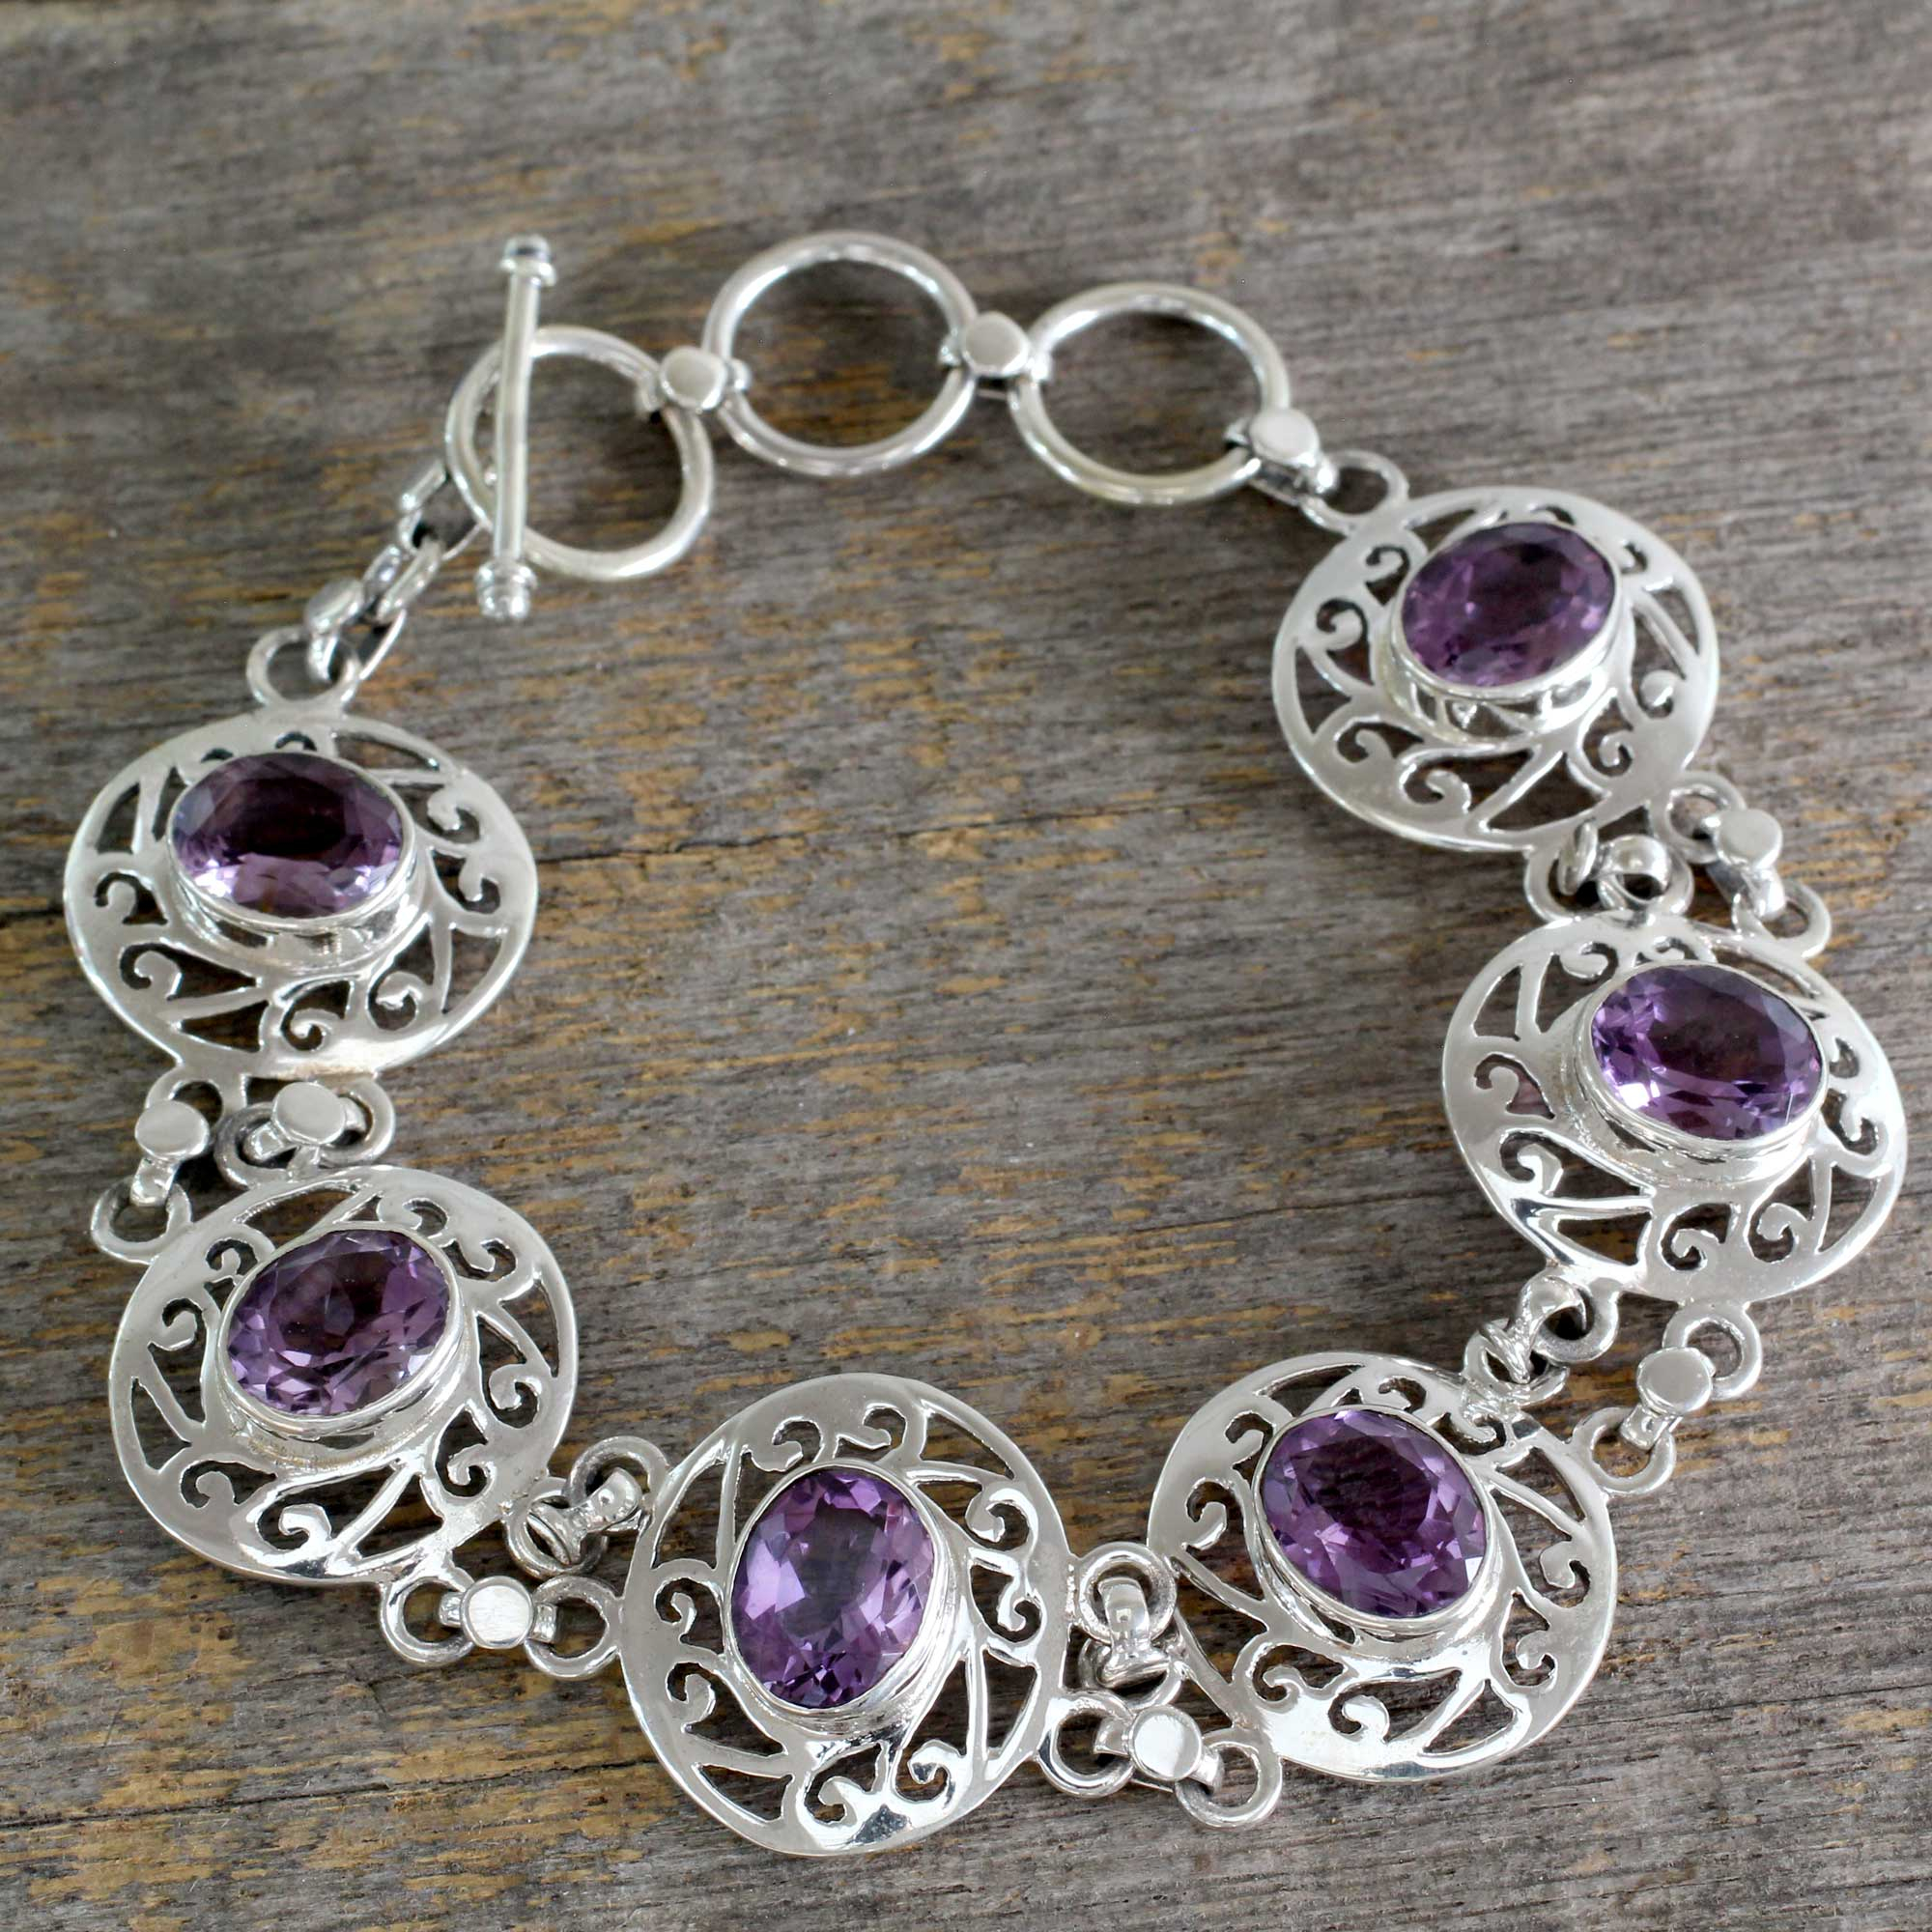 UNICEF Market | Amethyst and Sterling Silver Bracelet from India ...